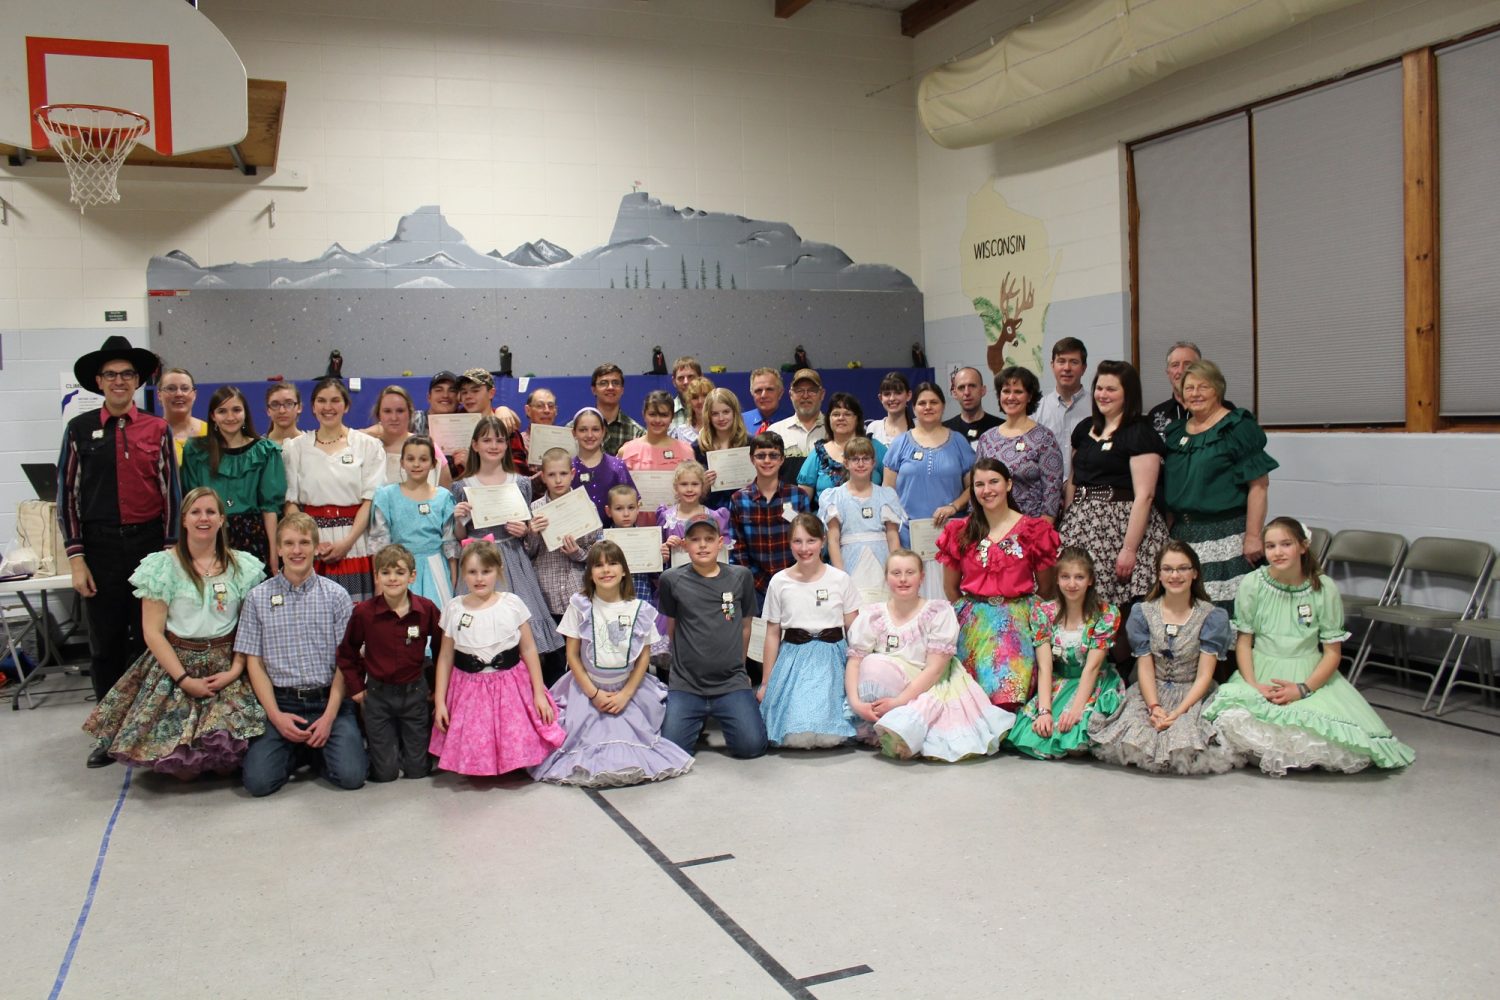 ‘Square ‘Em Up’ brings square dancing back to local community